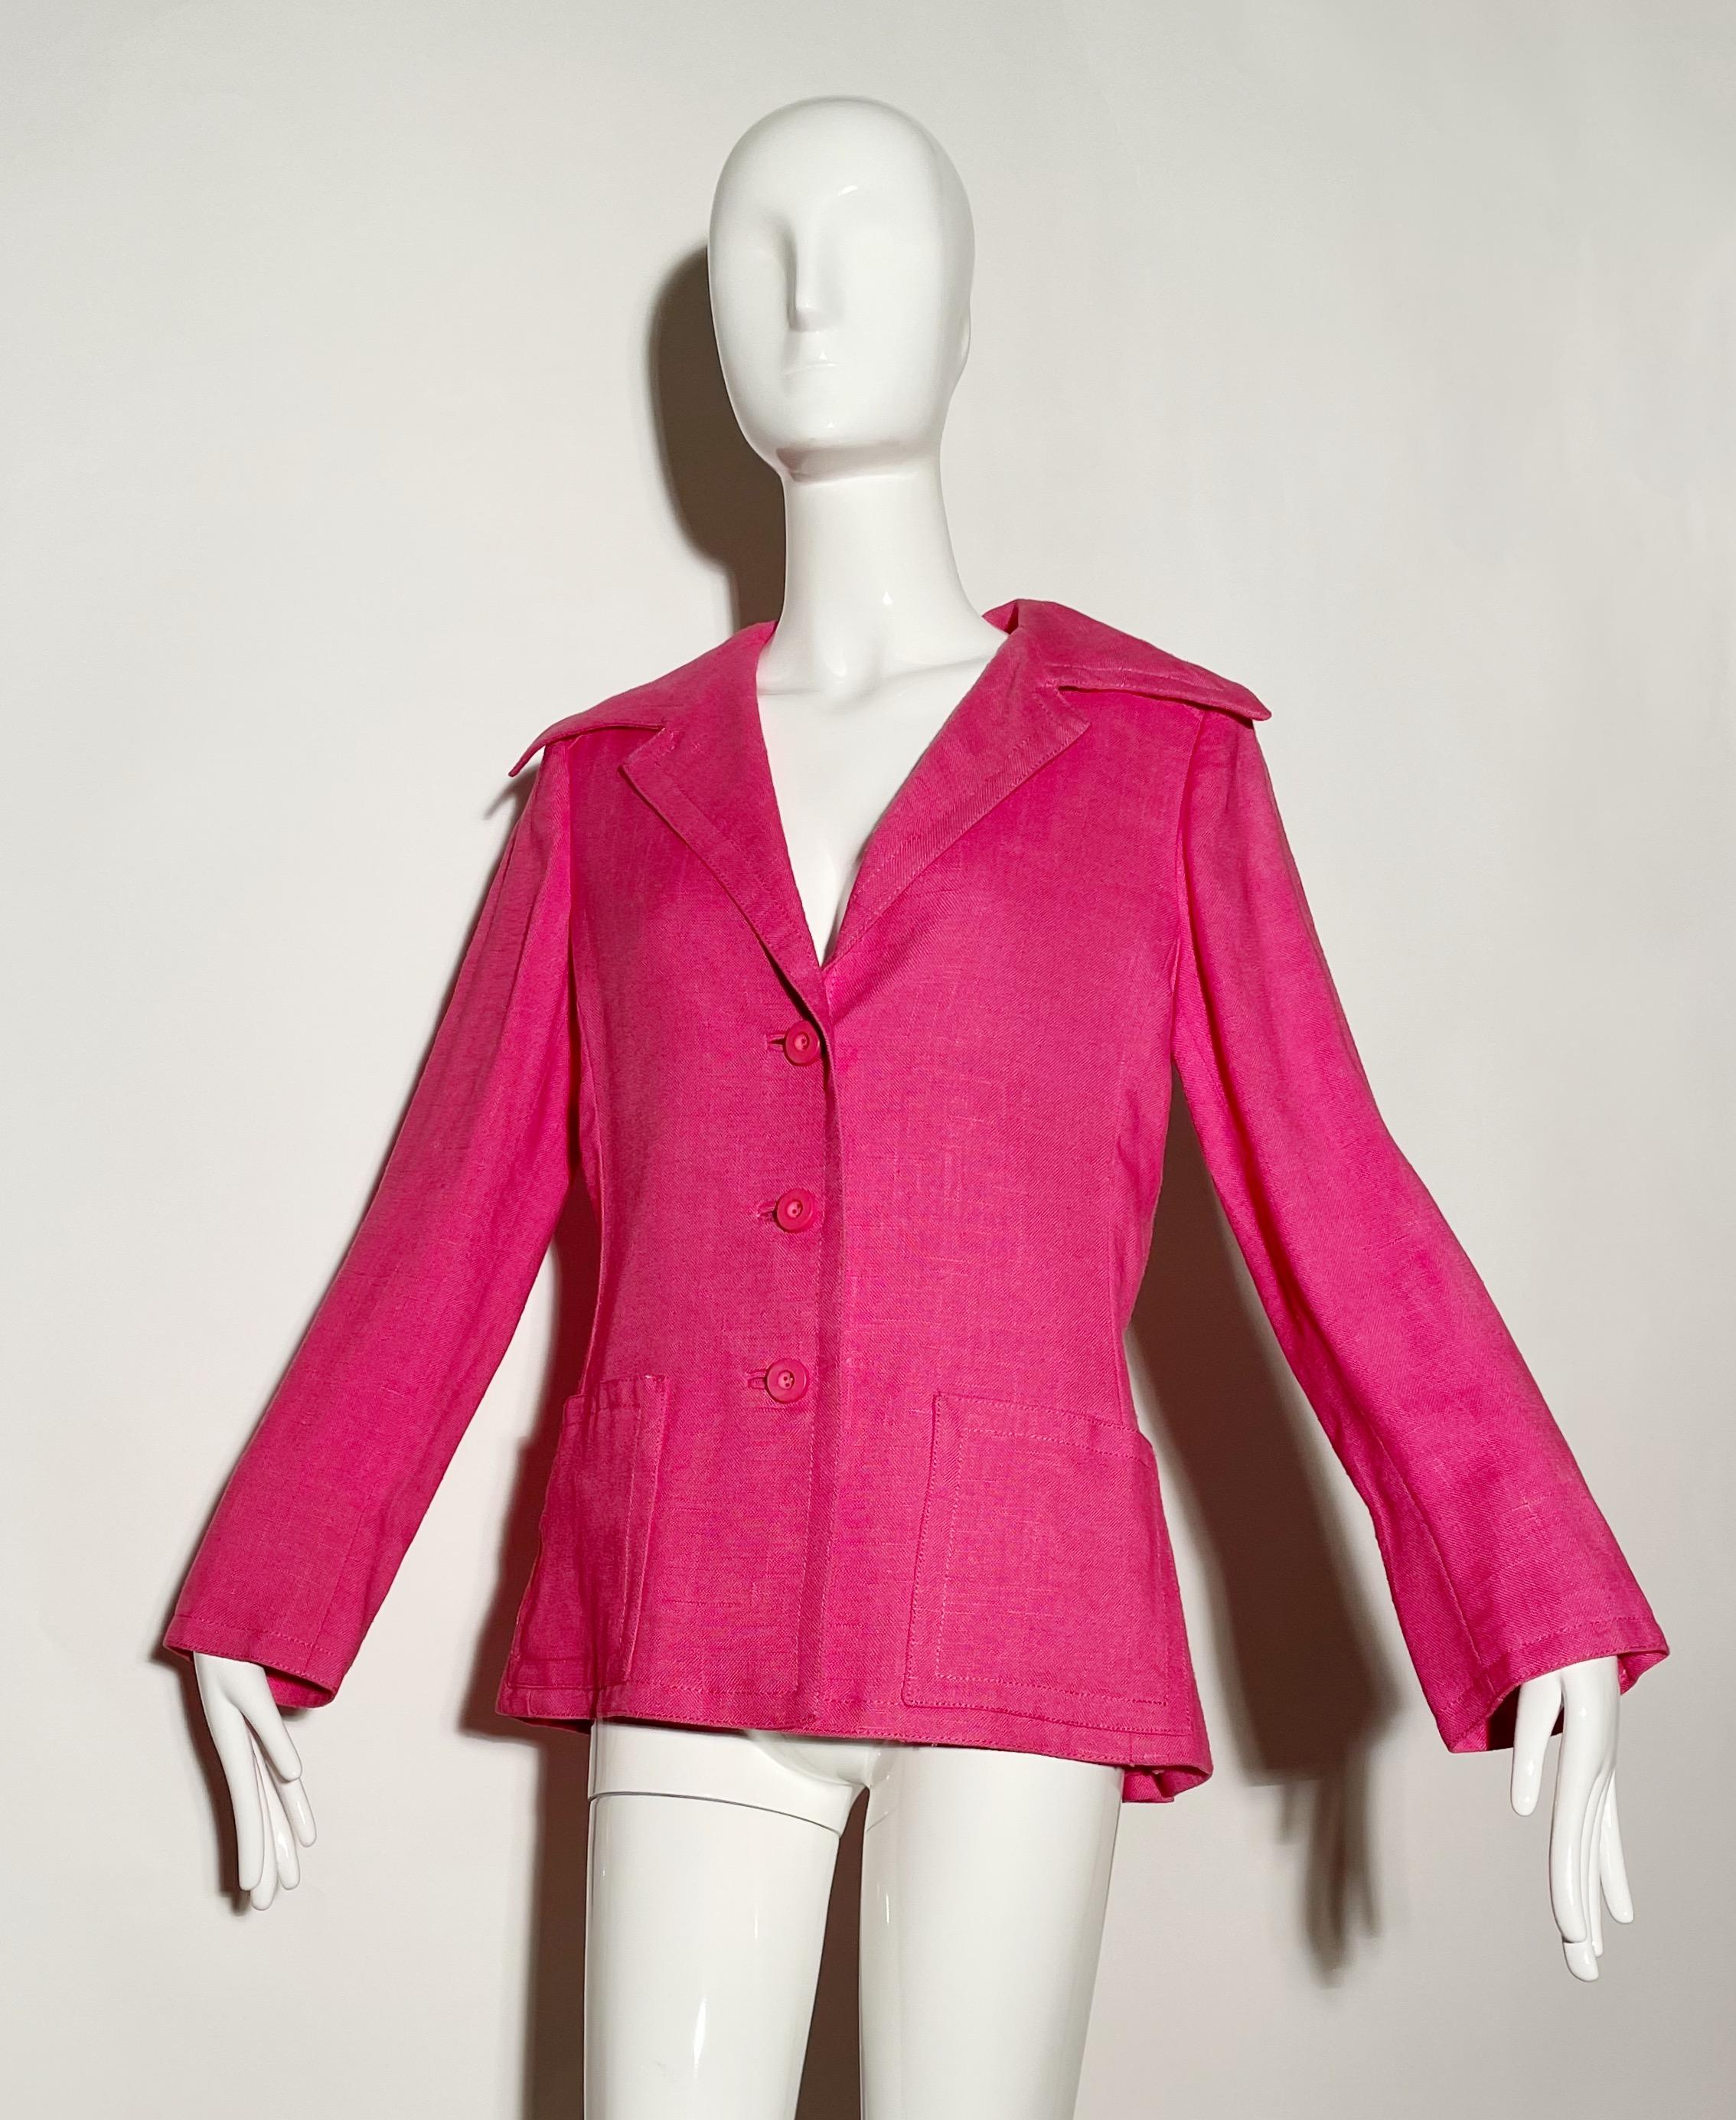 Pink blazer. Dramatic color. Front buttons. Front pockets. Linen. Lined. 
*Condition: Excellent vintage condition. No visible Flaws.

Measurements Taken Laying Flat (inches)—
Shoulder to Shoulder: 16 in.
Sleeve Length: 23 in.
Bust: 40 in.
Waist: 34